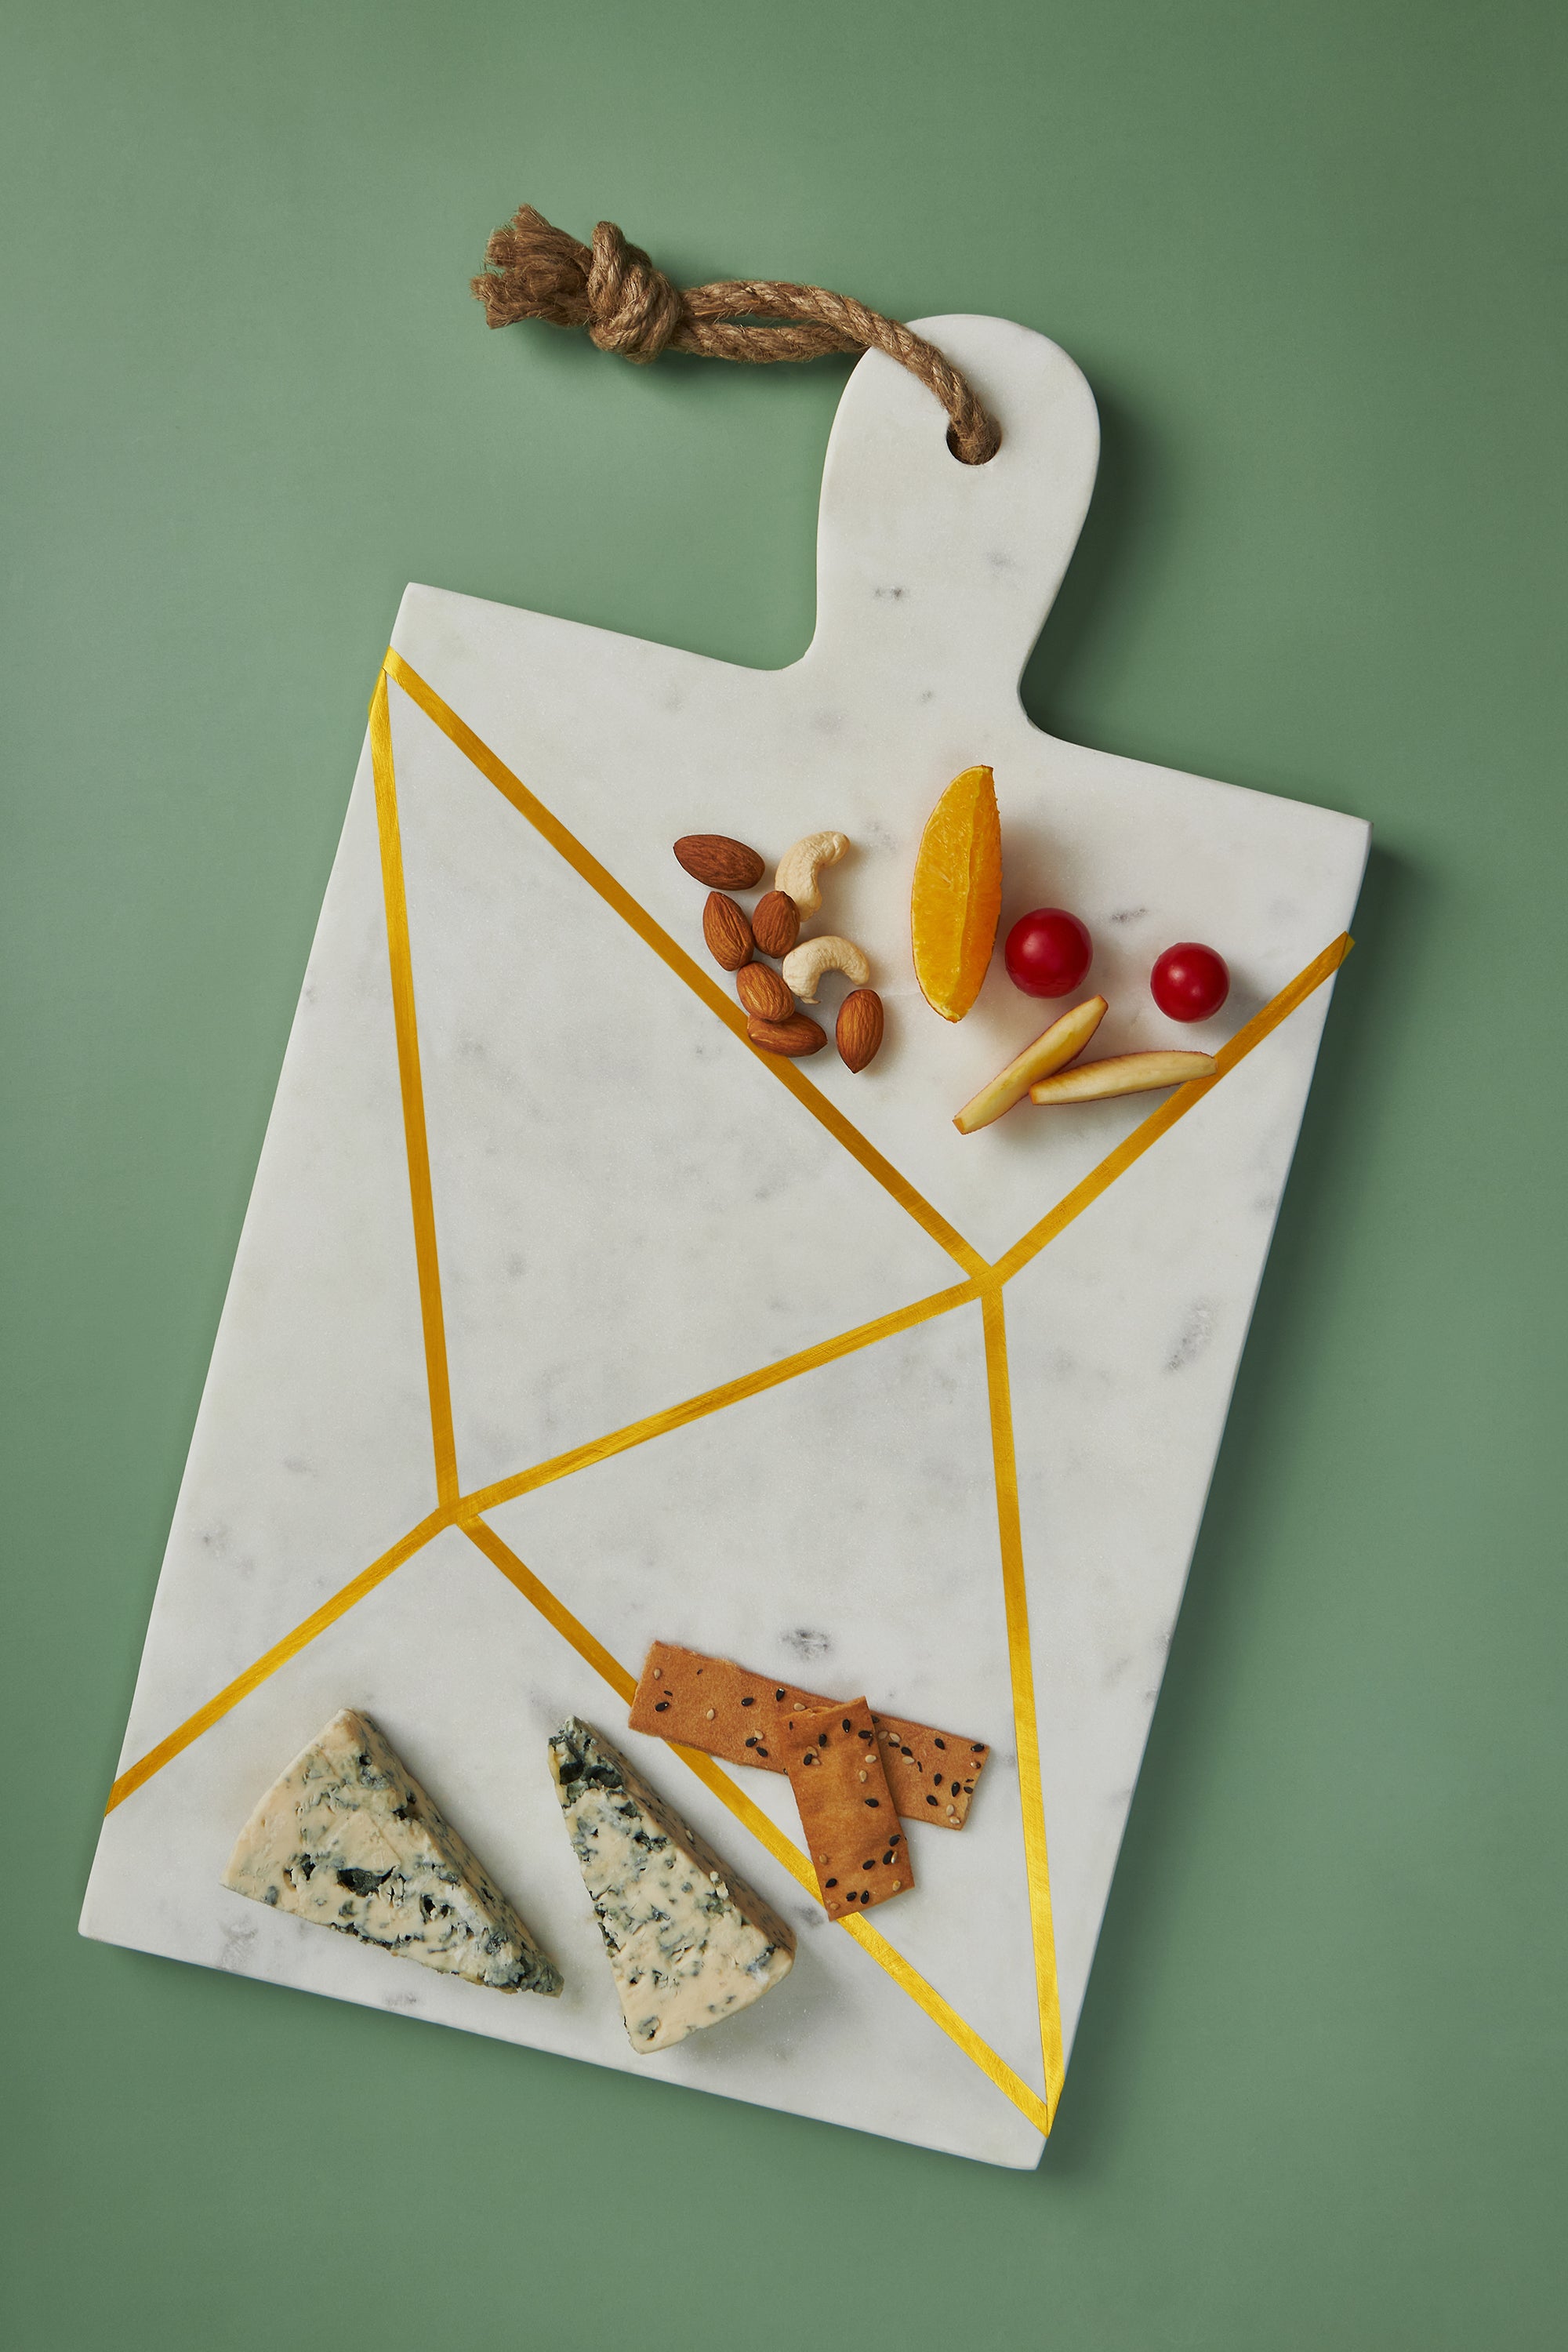 https://cdn.shopify.com/s/files/1/0043/0800/9030/products/GK51023-1-luxury-marble-cheese-board-with-gold-inlay-large-size.jpg?v=1642762497&width=2000